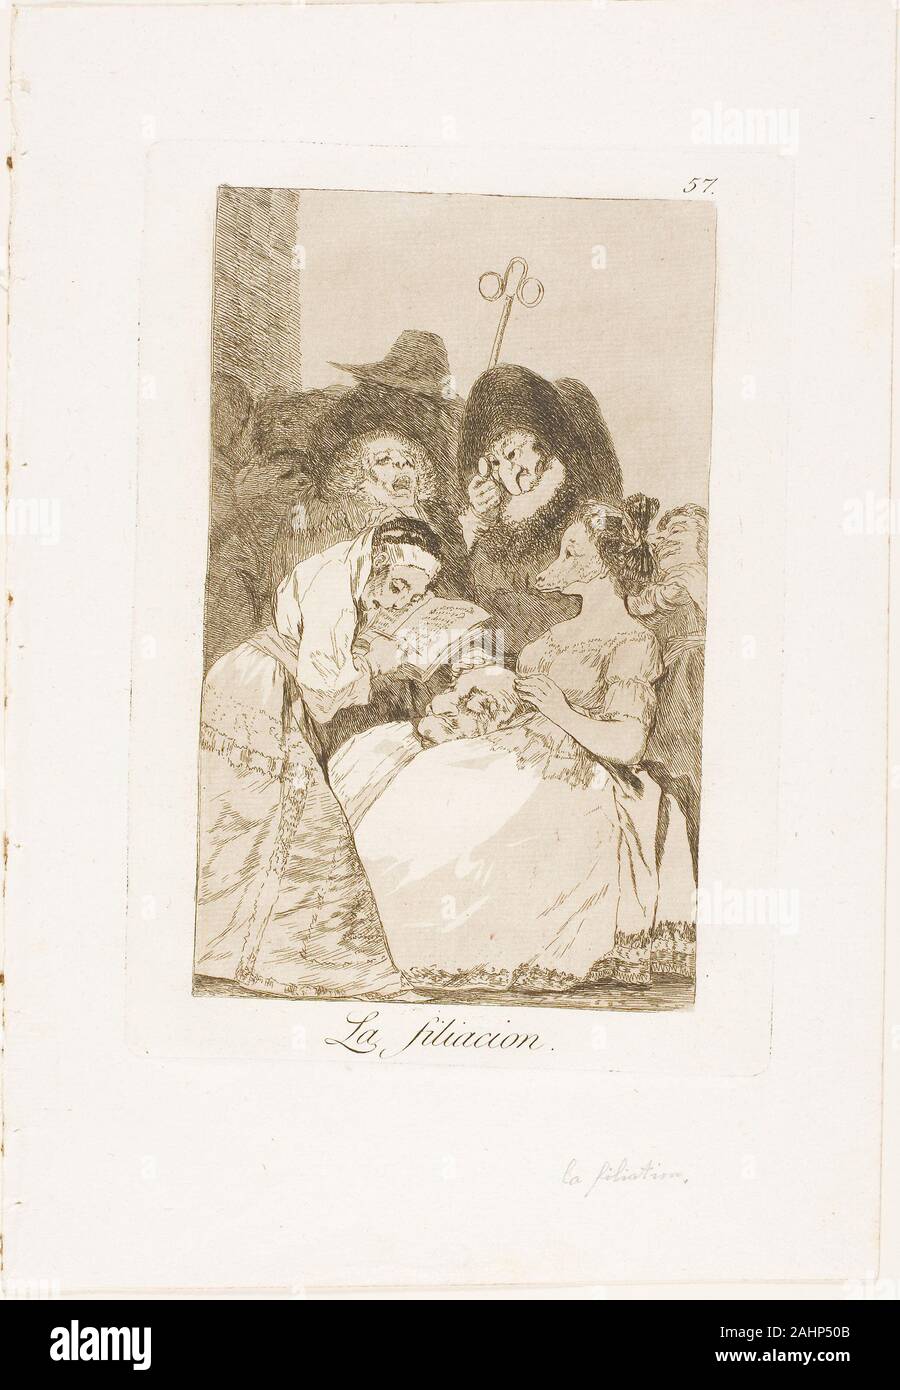 Francisco José de Goya y Lucientes. The Filiation, plate 57 from Los Caprichos. 1797–1799. Spain. Etching and aquatint on ivory laid paper Stock Photo